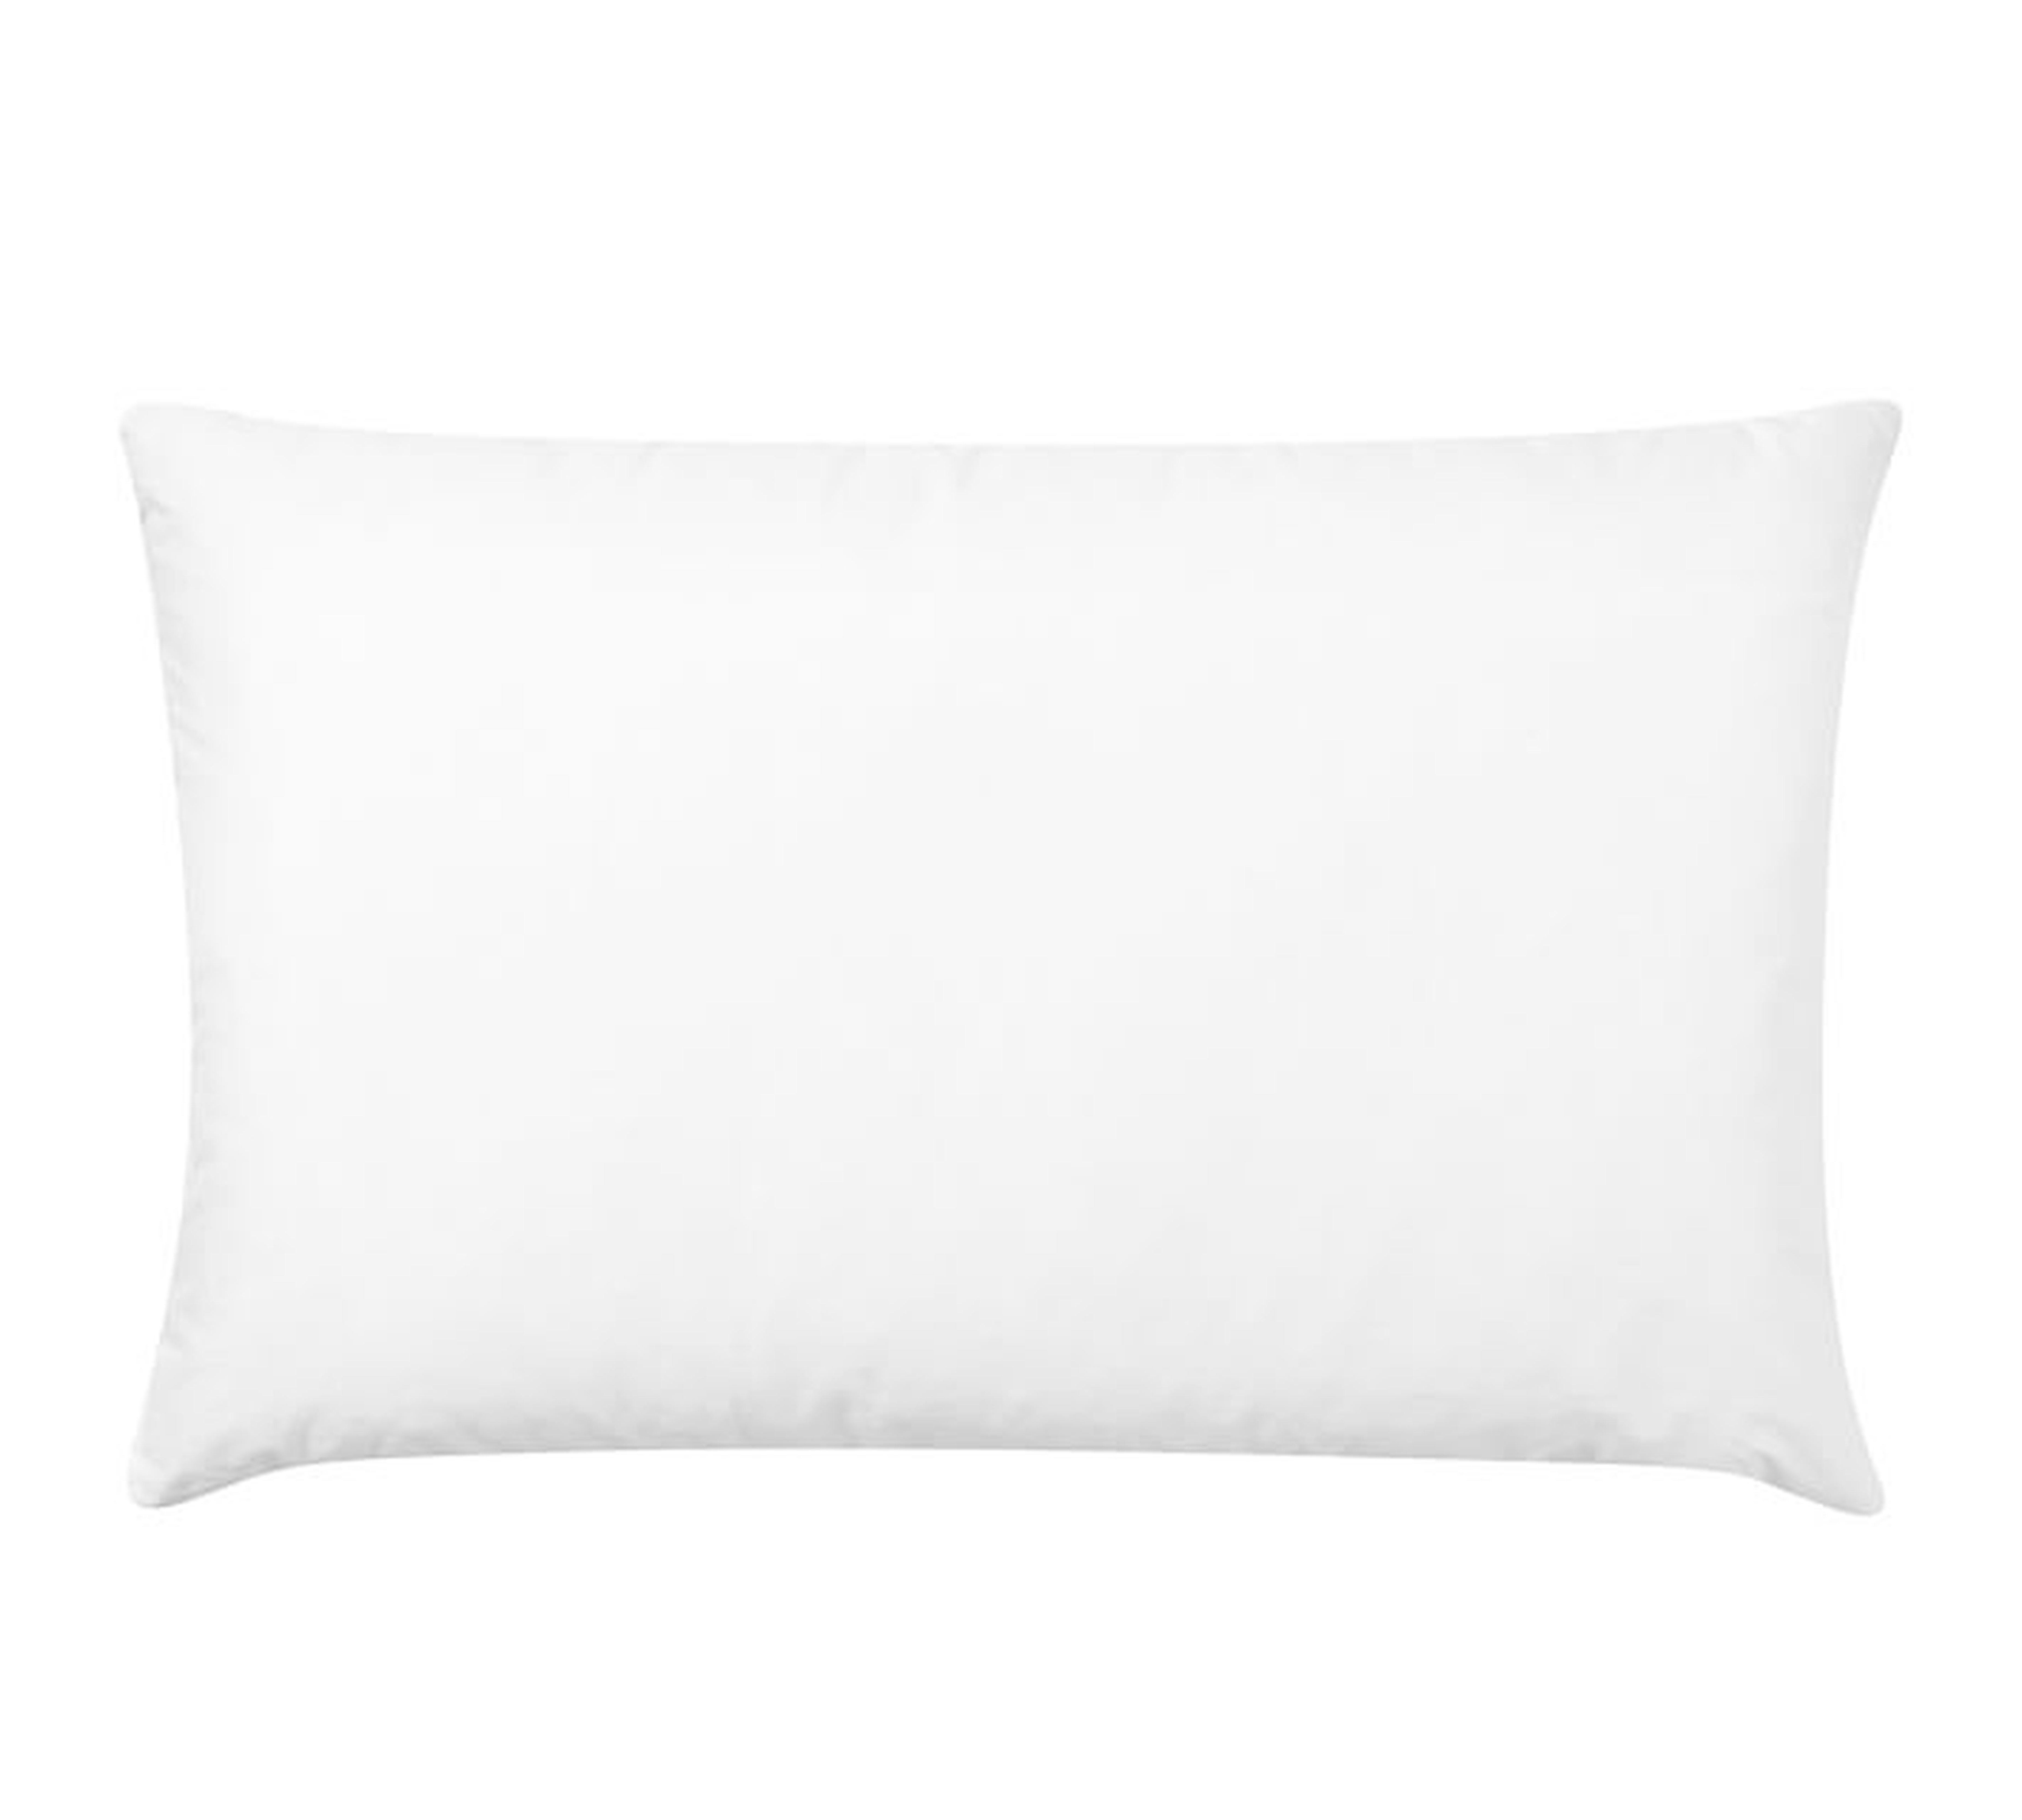 FEATHER PILLOW INSERT, 16"x26" - Pottery Barn